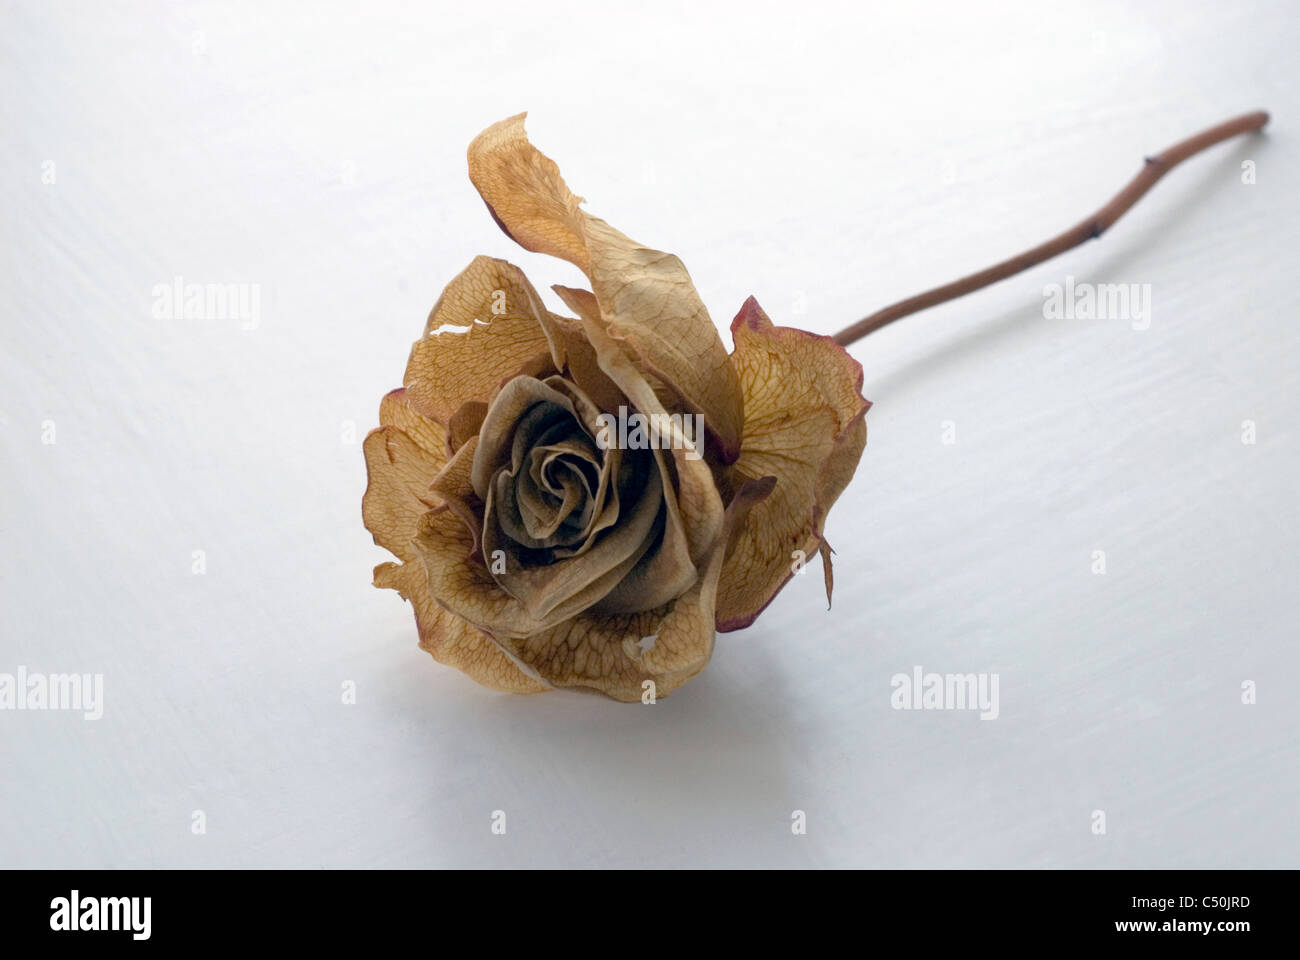 Dried and dessicated rose flower Stock Photo